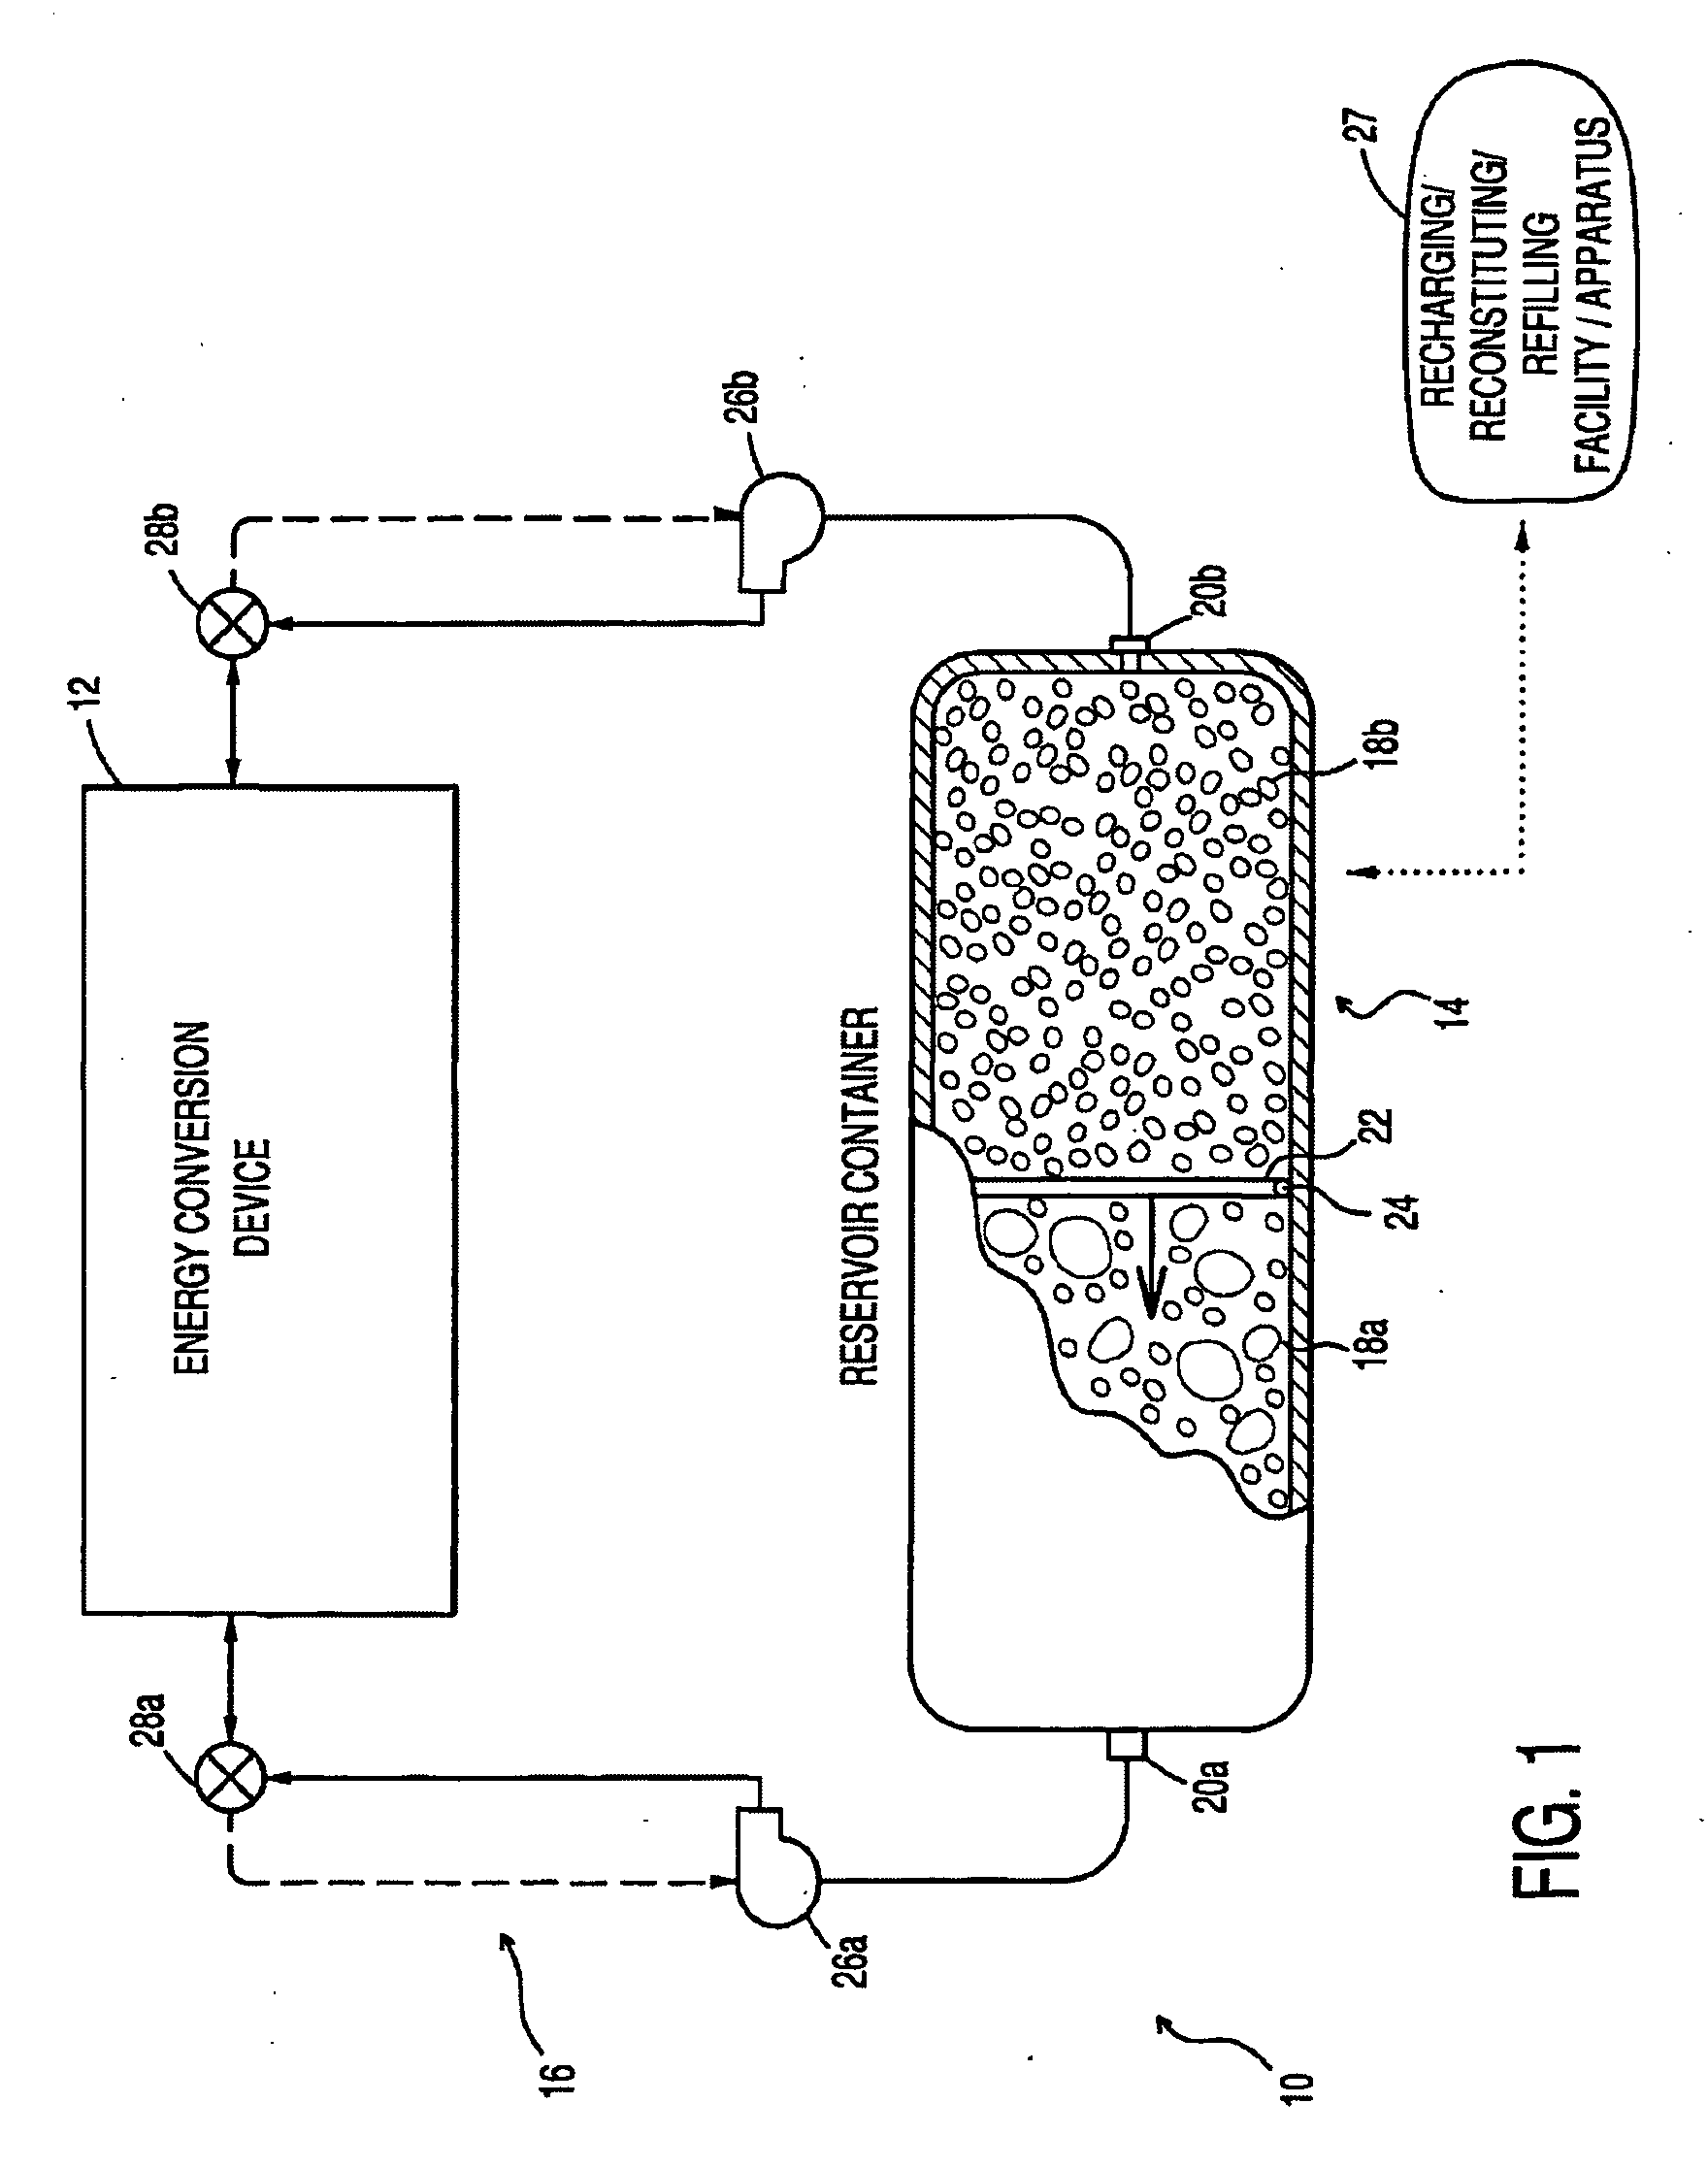 Fuel containment and recycling system